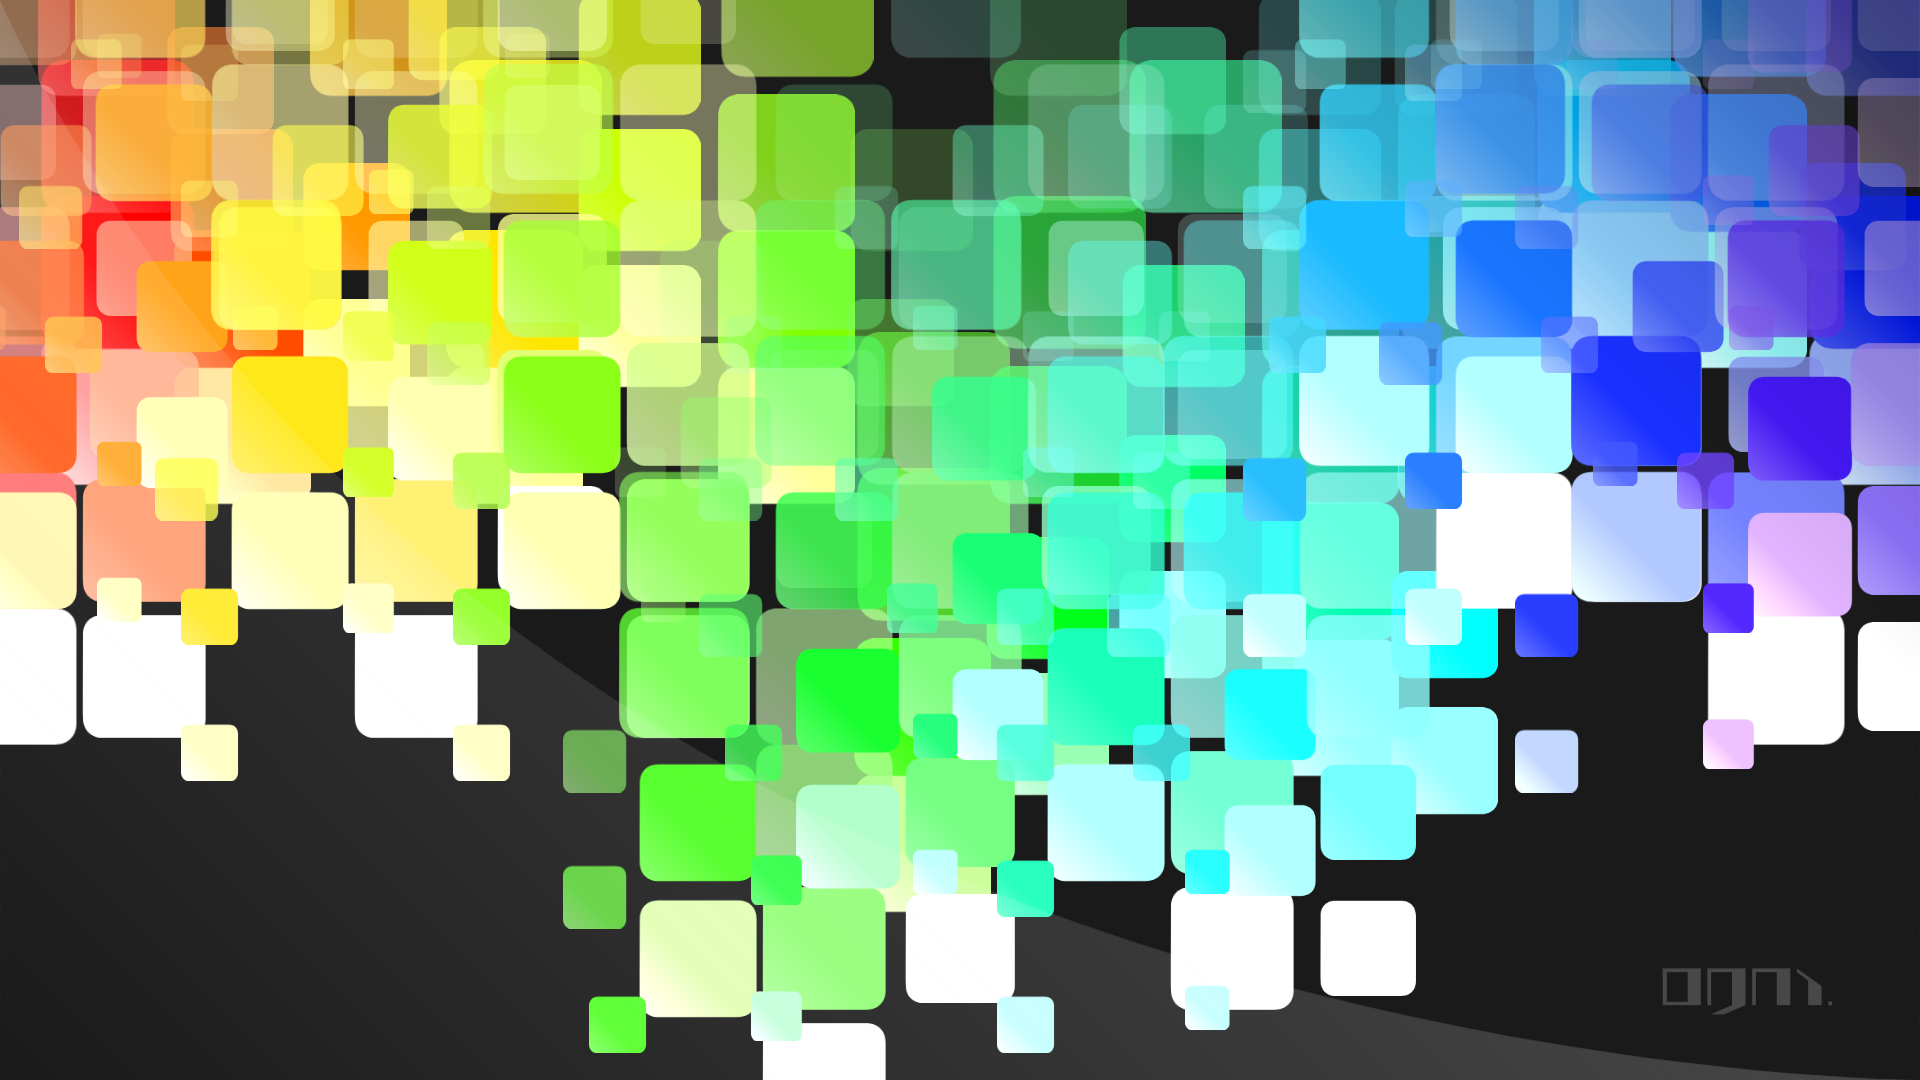 General 1920x1080 abstract square bubbles colorful bright minimalism vector